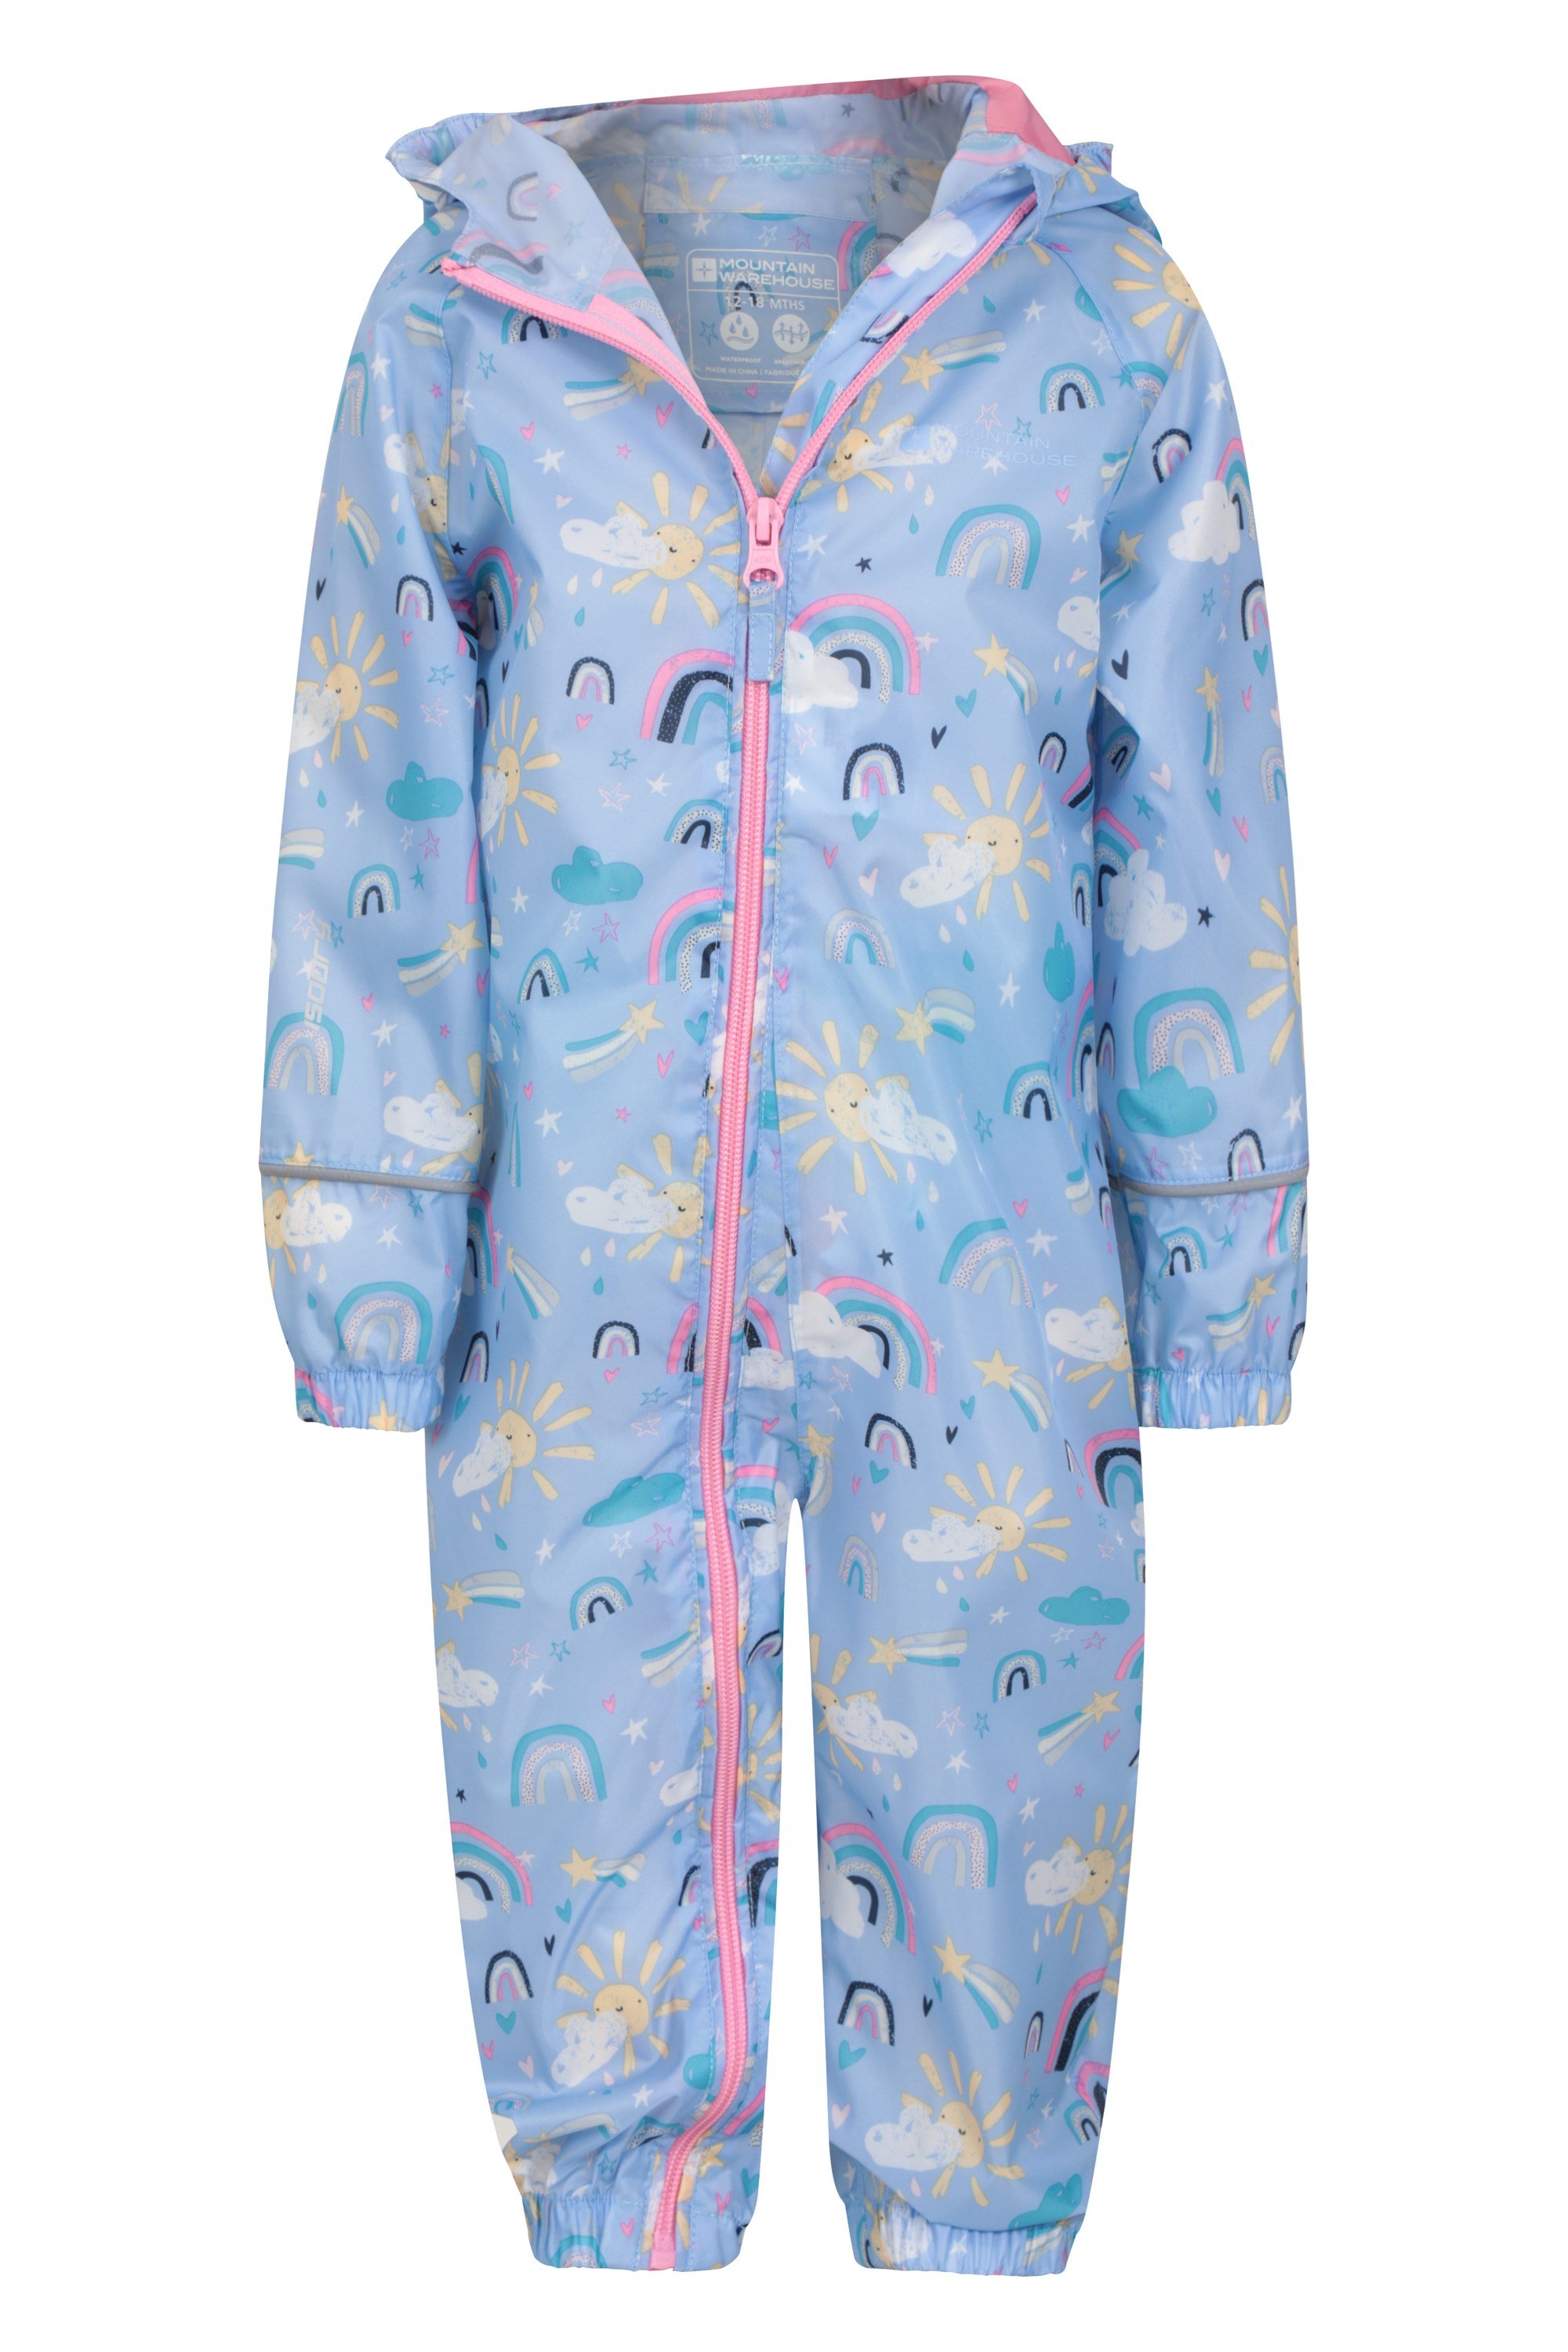 Mountain Warehouse Mountain Wharehouse Puddle Suit 12-18 Months 